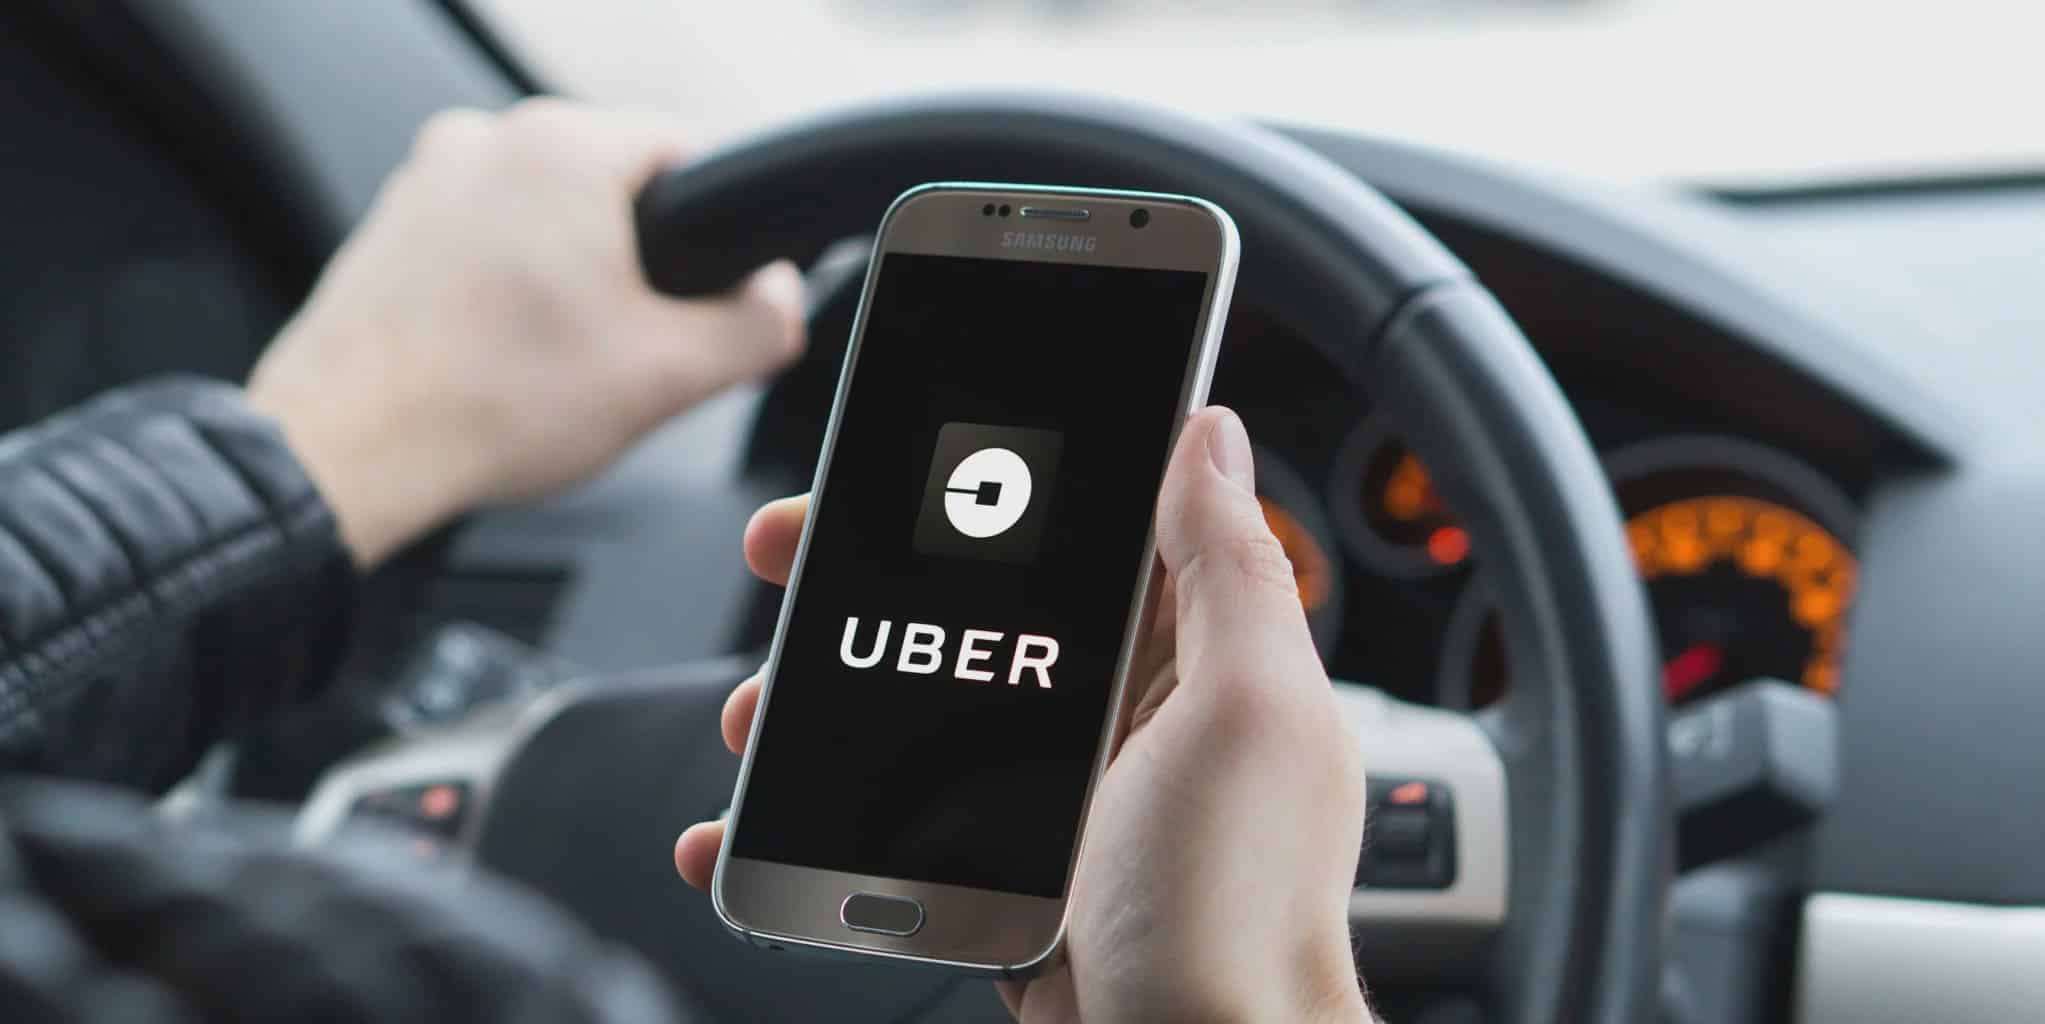 Uber fined $650M by New Jersey for misclassifying its drivers as independent contractors